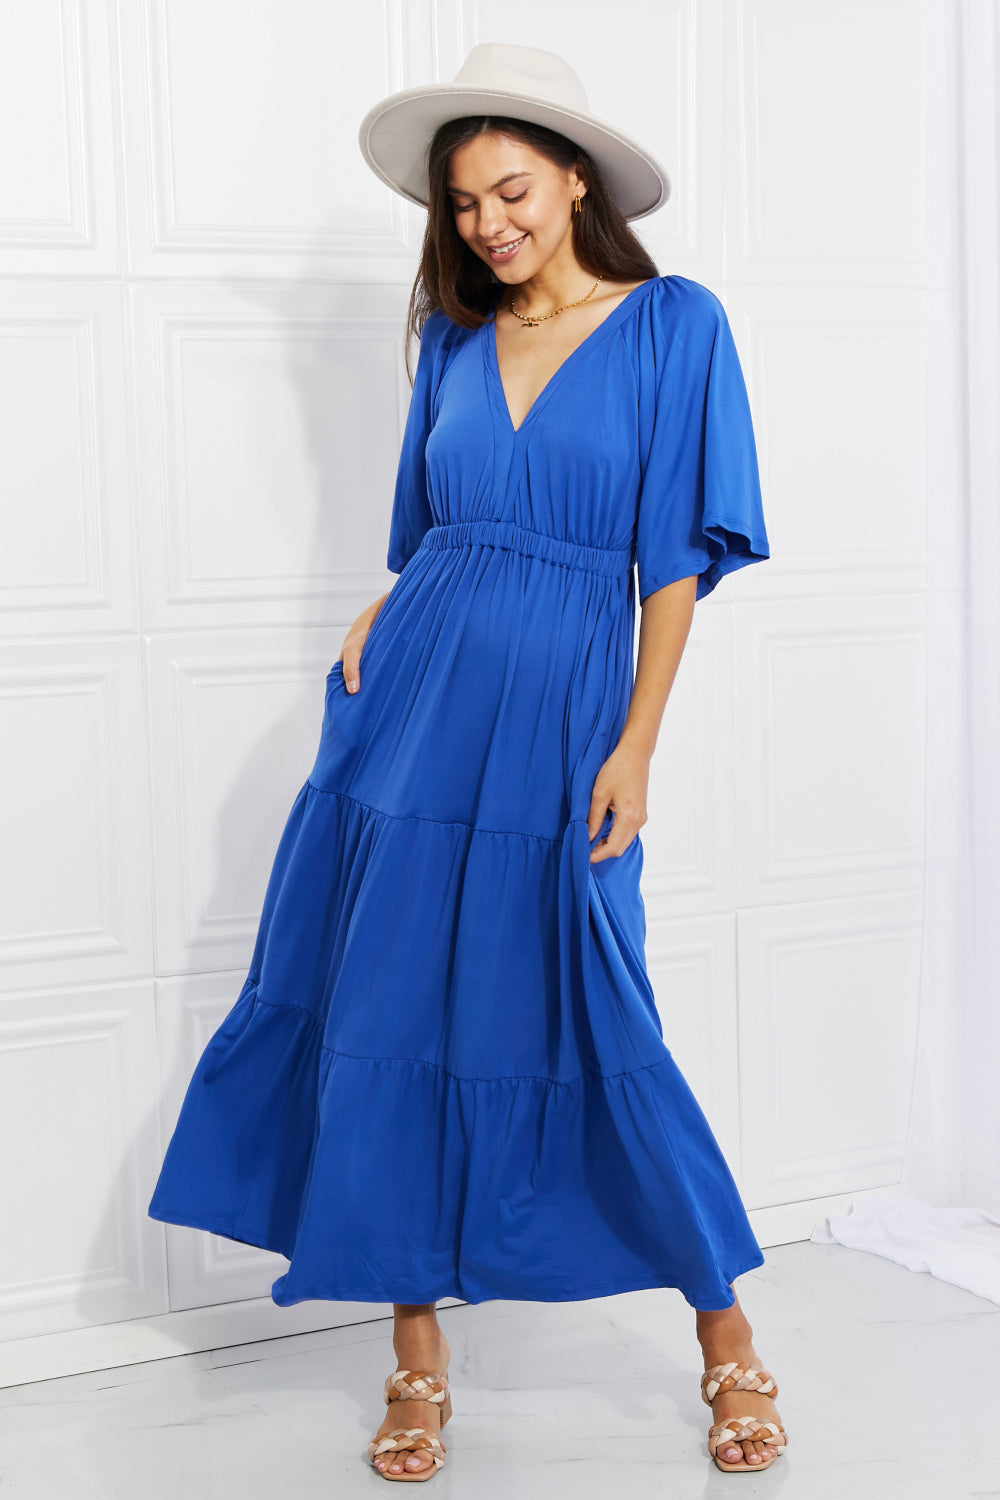 My Muse Flare Sleeve Tiered Maxi Dress Small-3XL